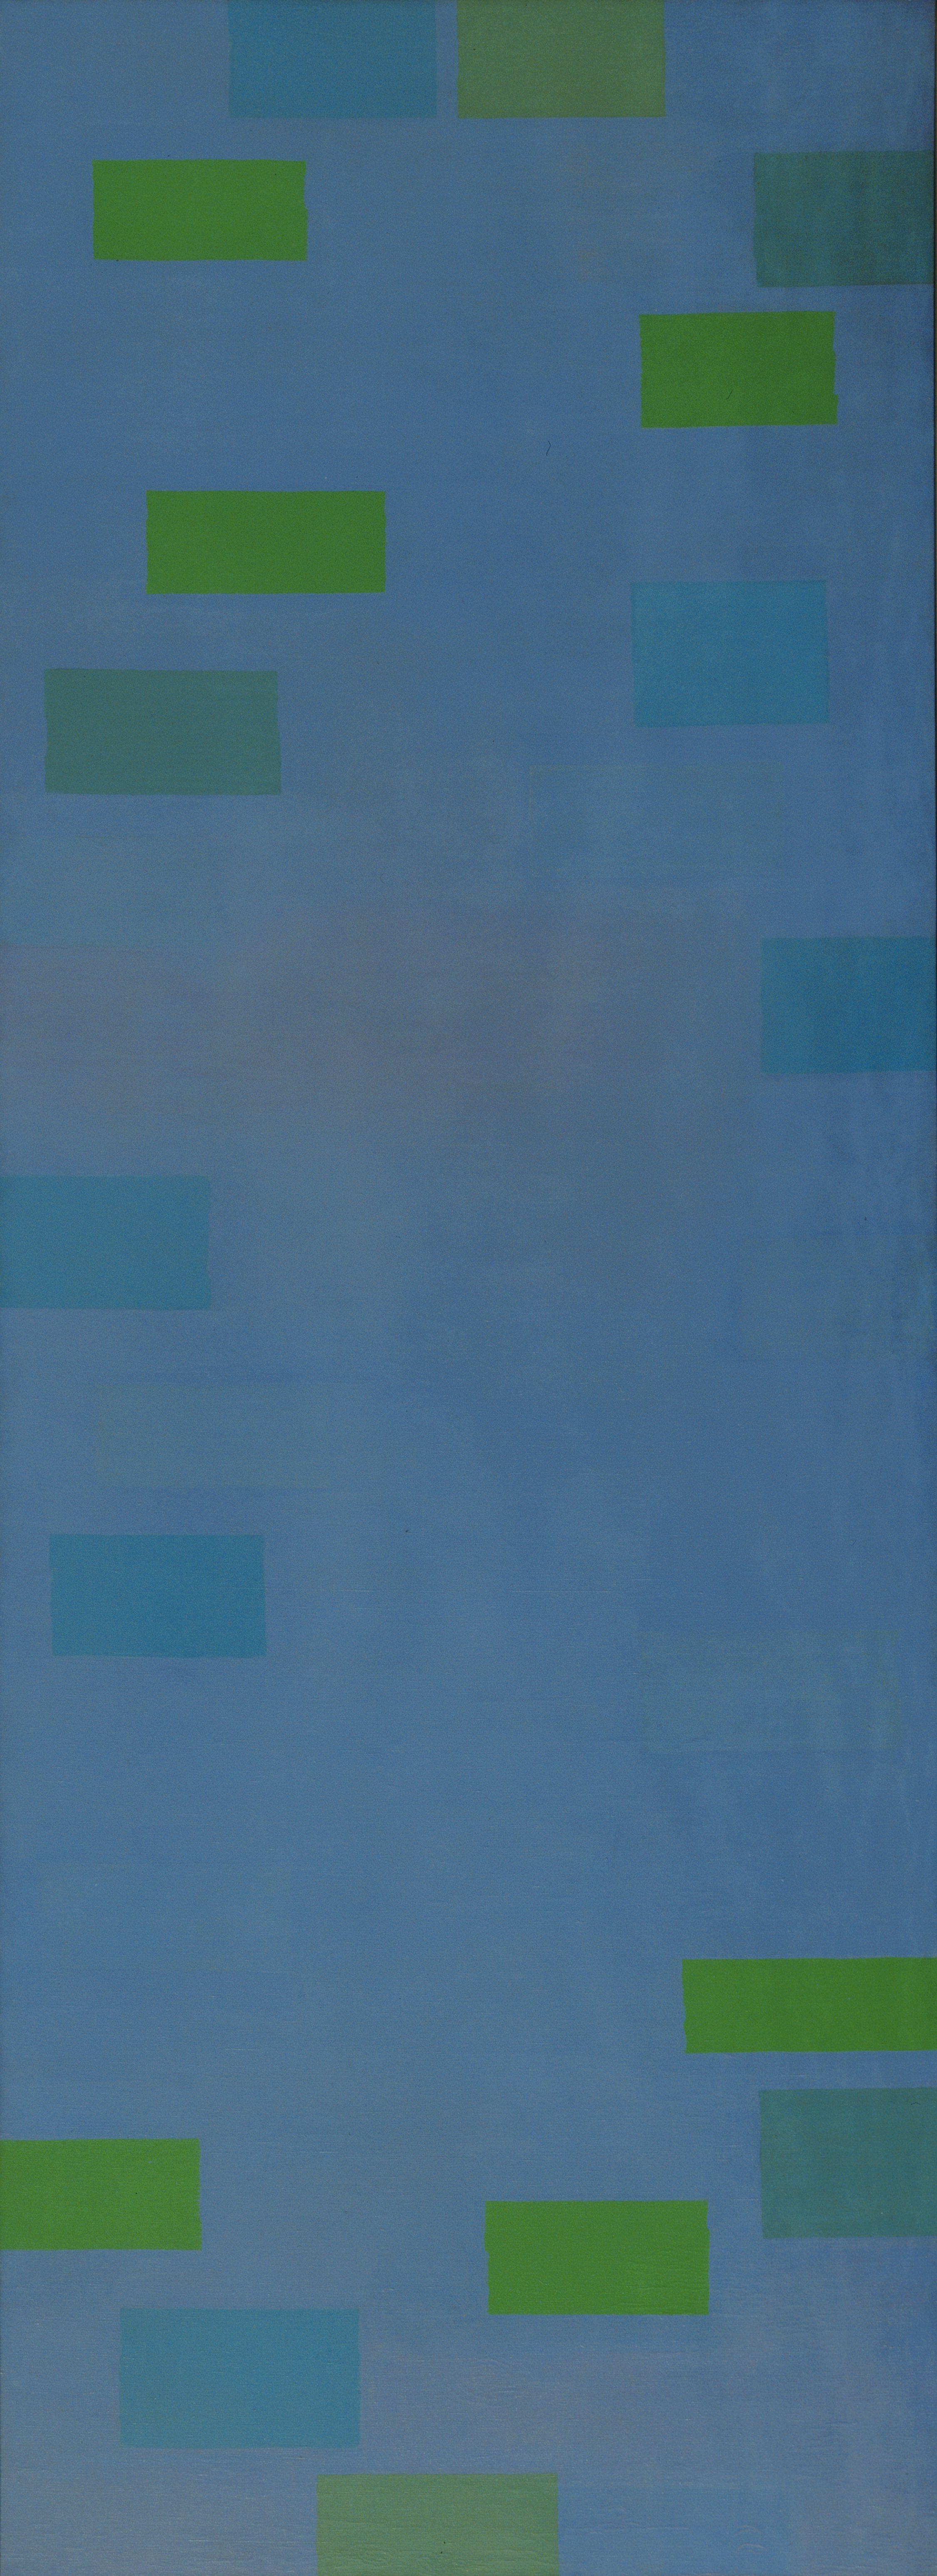 Ad Reinhardt. Abstract Painting (Blue). 1952